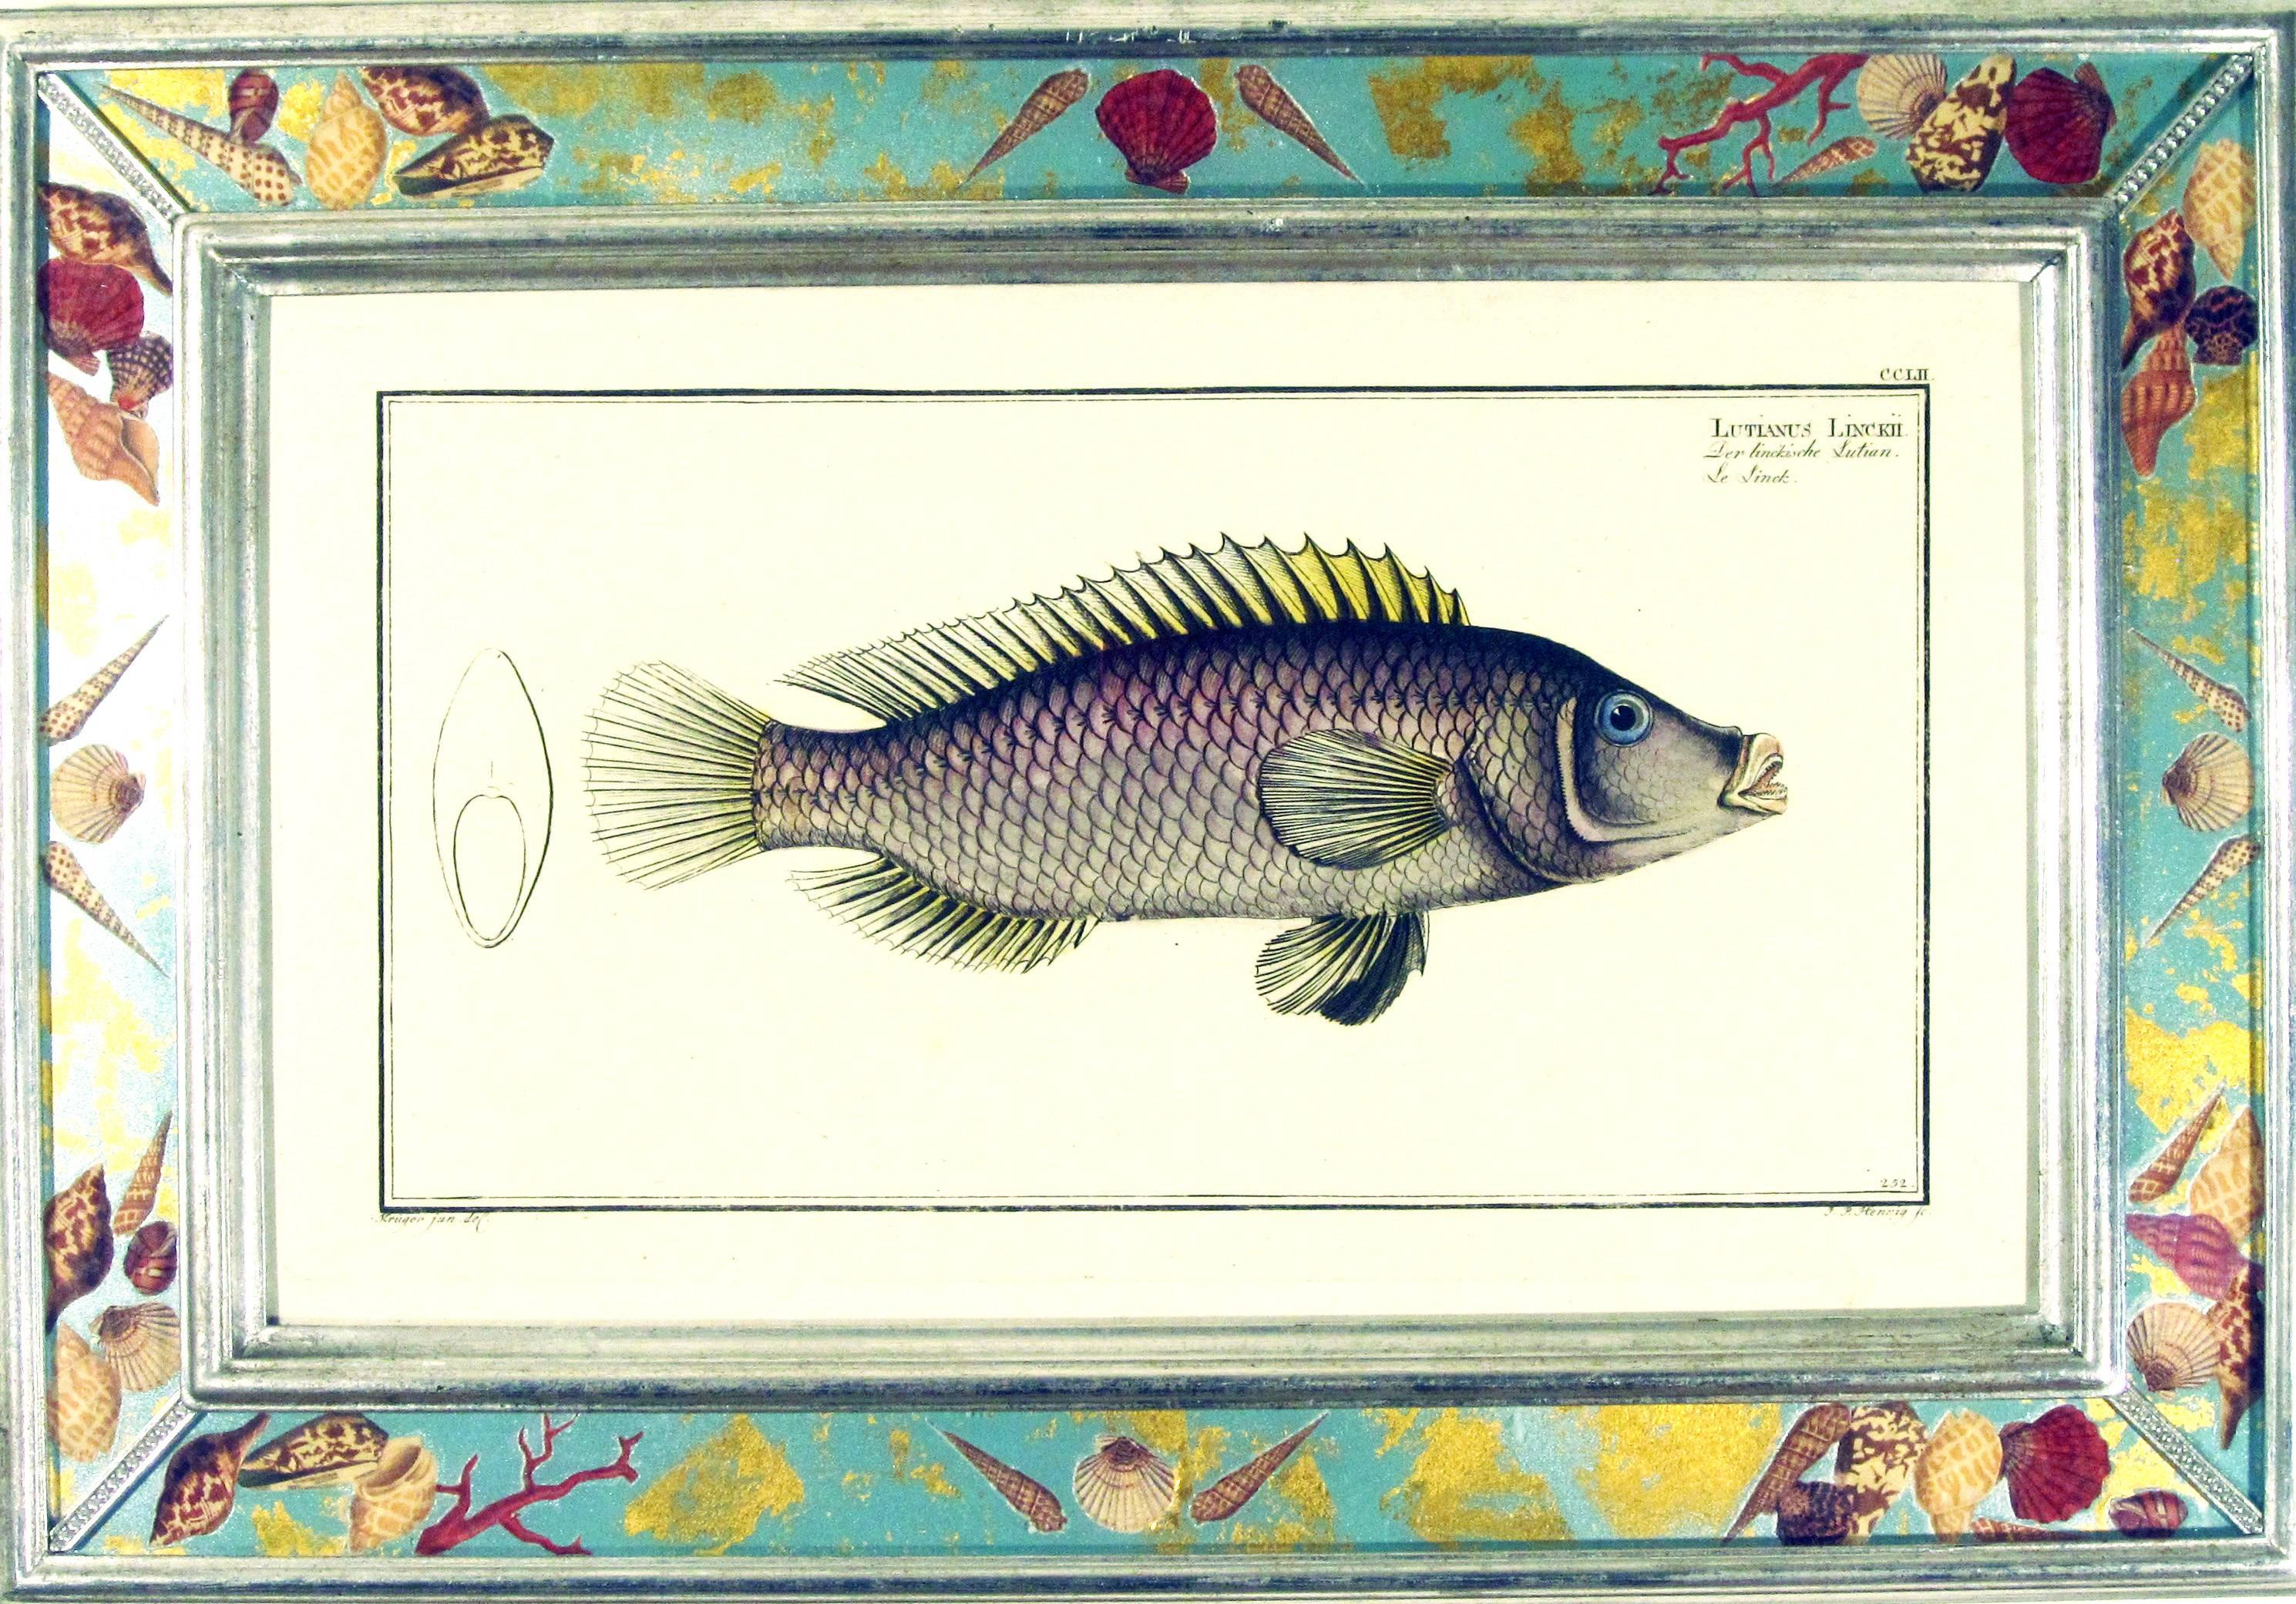 18th Century Engravings of Fish by Marcus Bloch,
A pair,
circa 1780.

A fine pair of prints of fish by Marcus Bloch with decoupage frame.

Dimensions: 13 3/4 inches x 20 inches wide.

Bloch issued folio and octavo prints and each specimen was